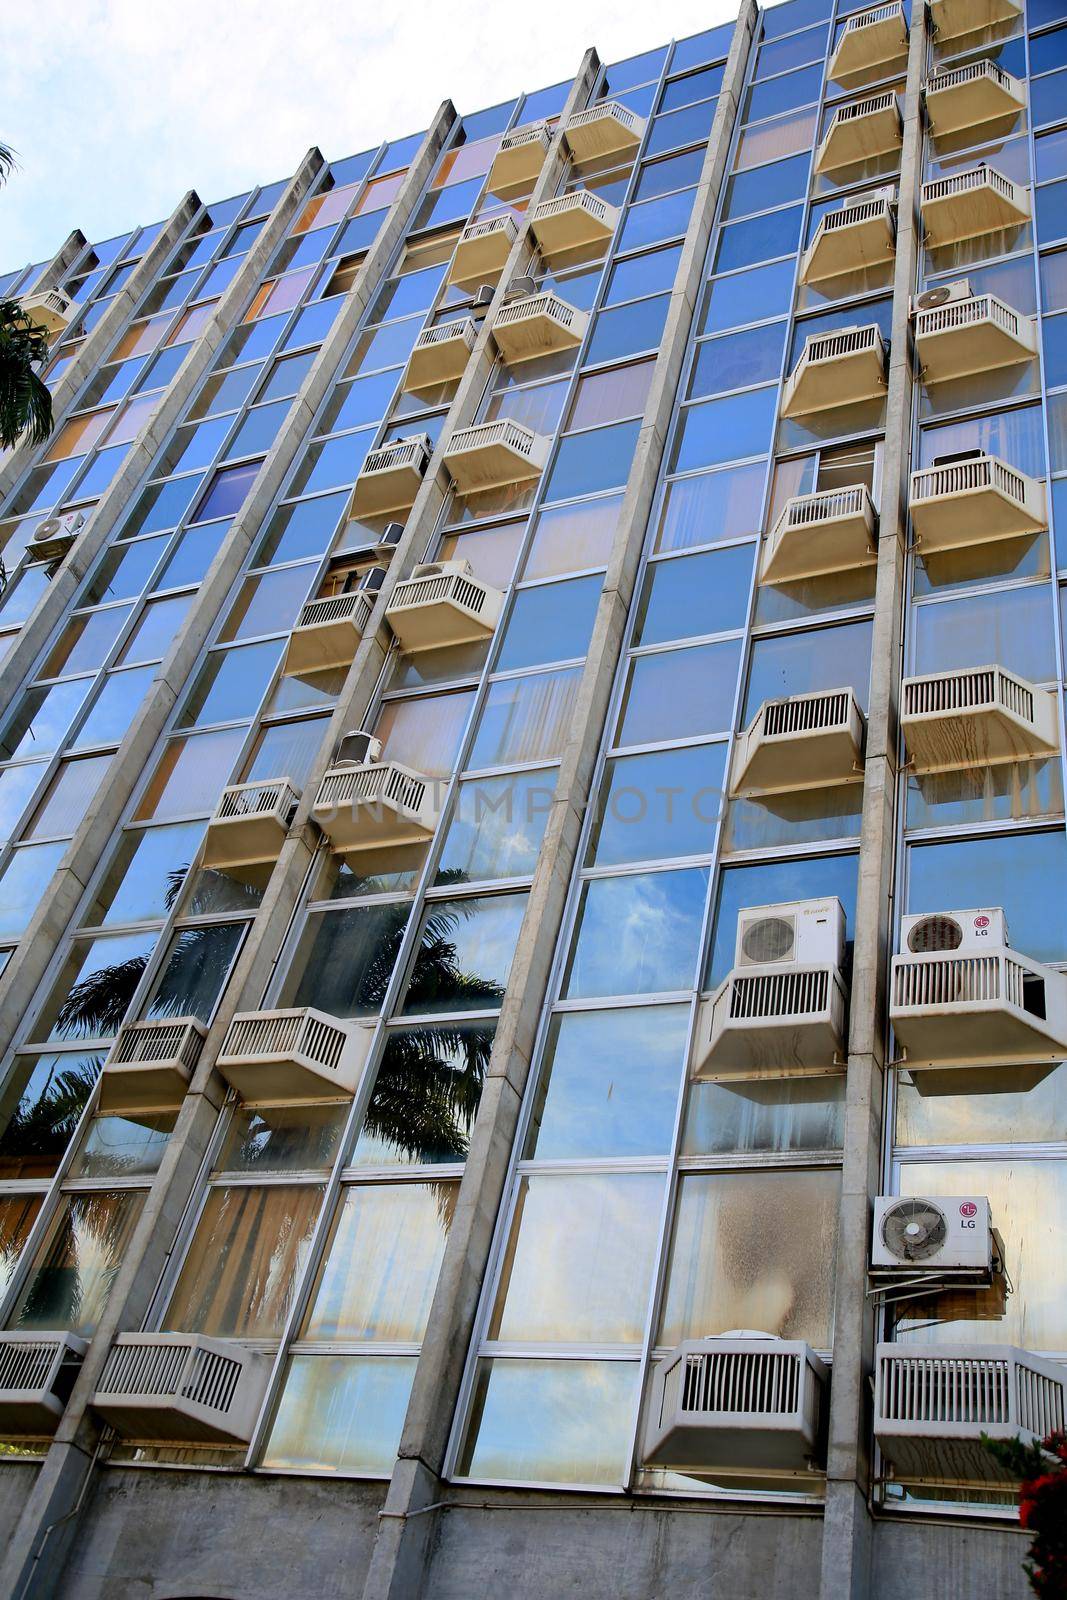 salvador, bahia, brazil - january 25, 2021: air conditioners are seen on the facade of a commercial building in the city of Salvador.